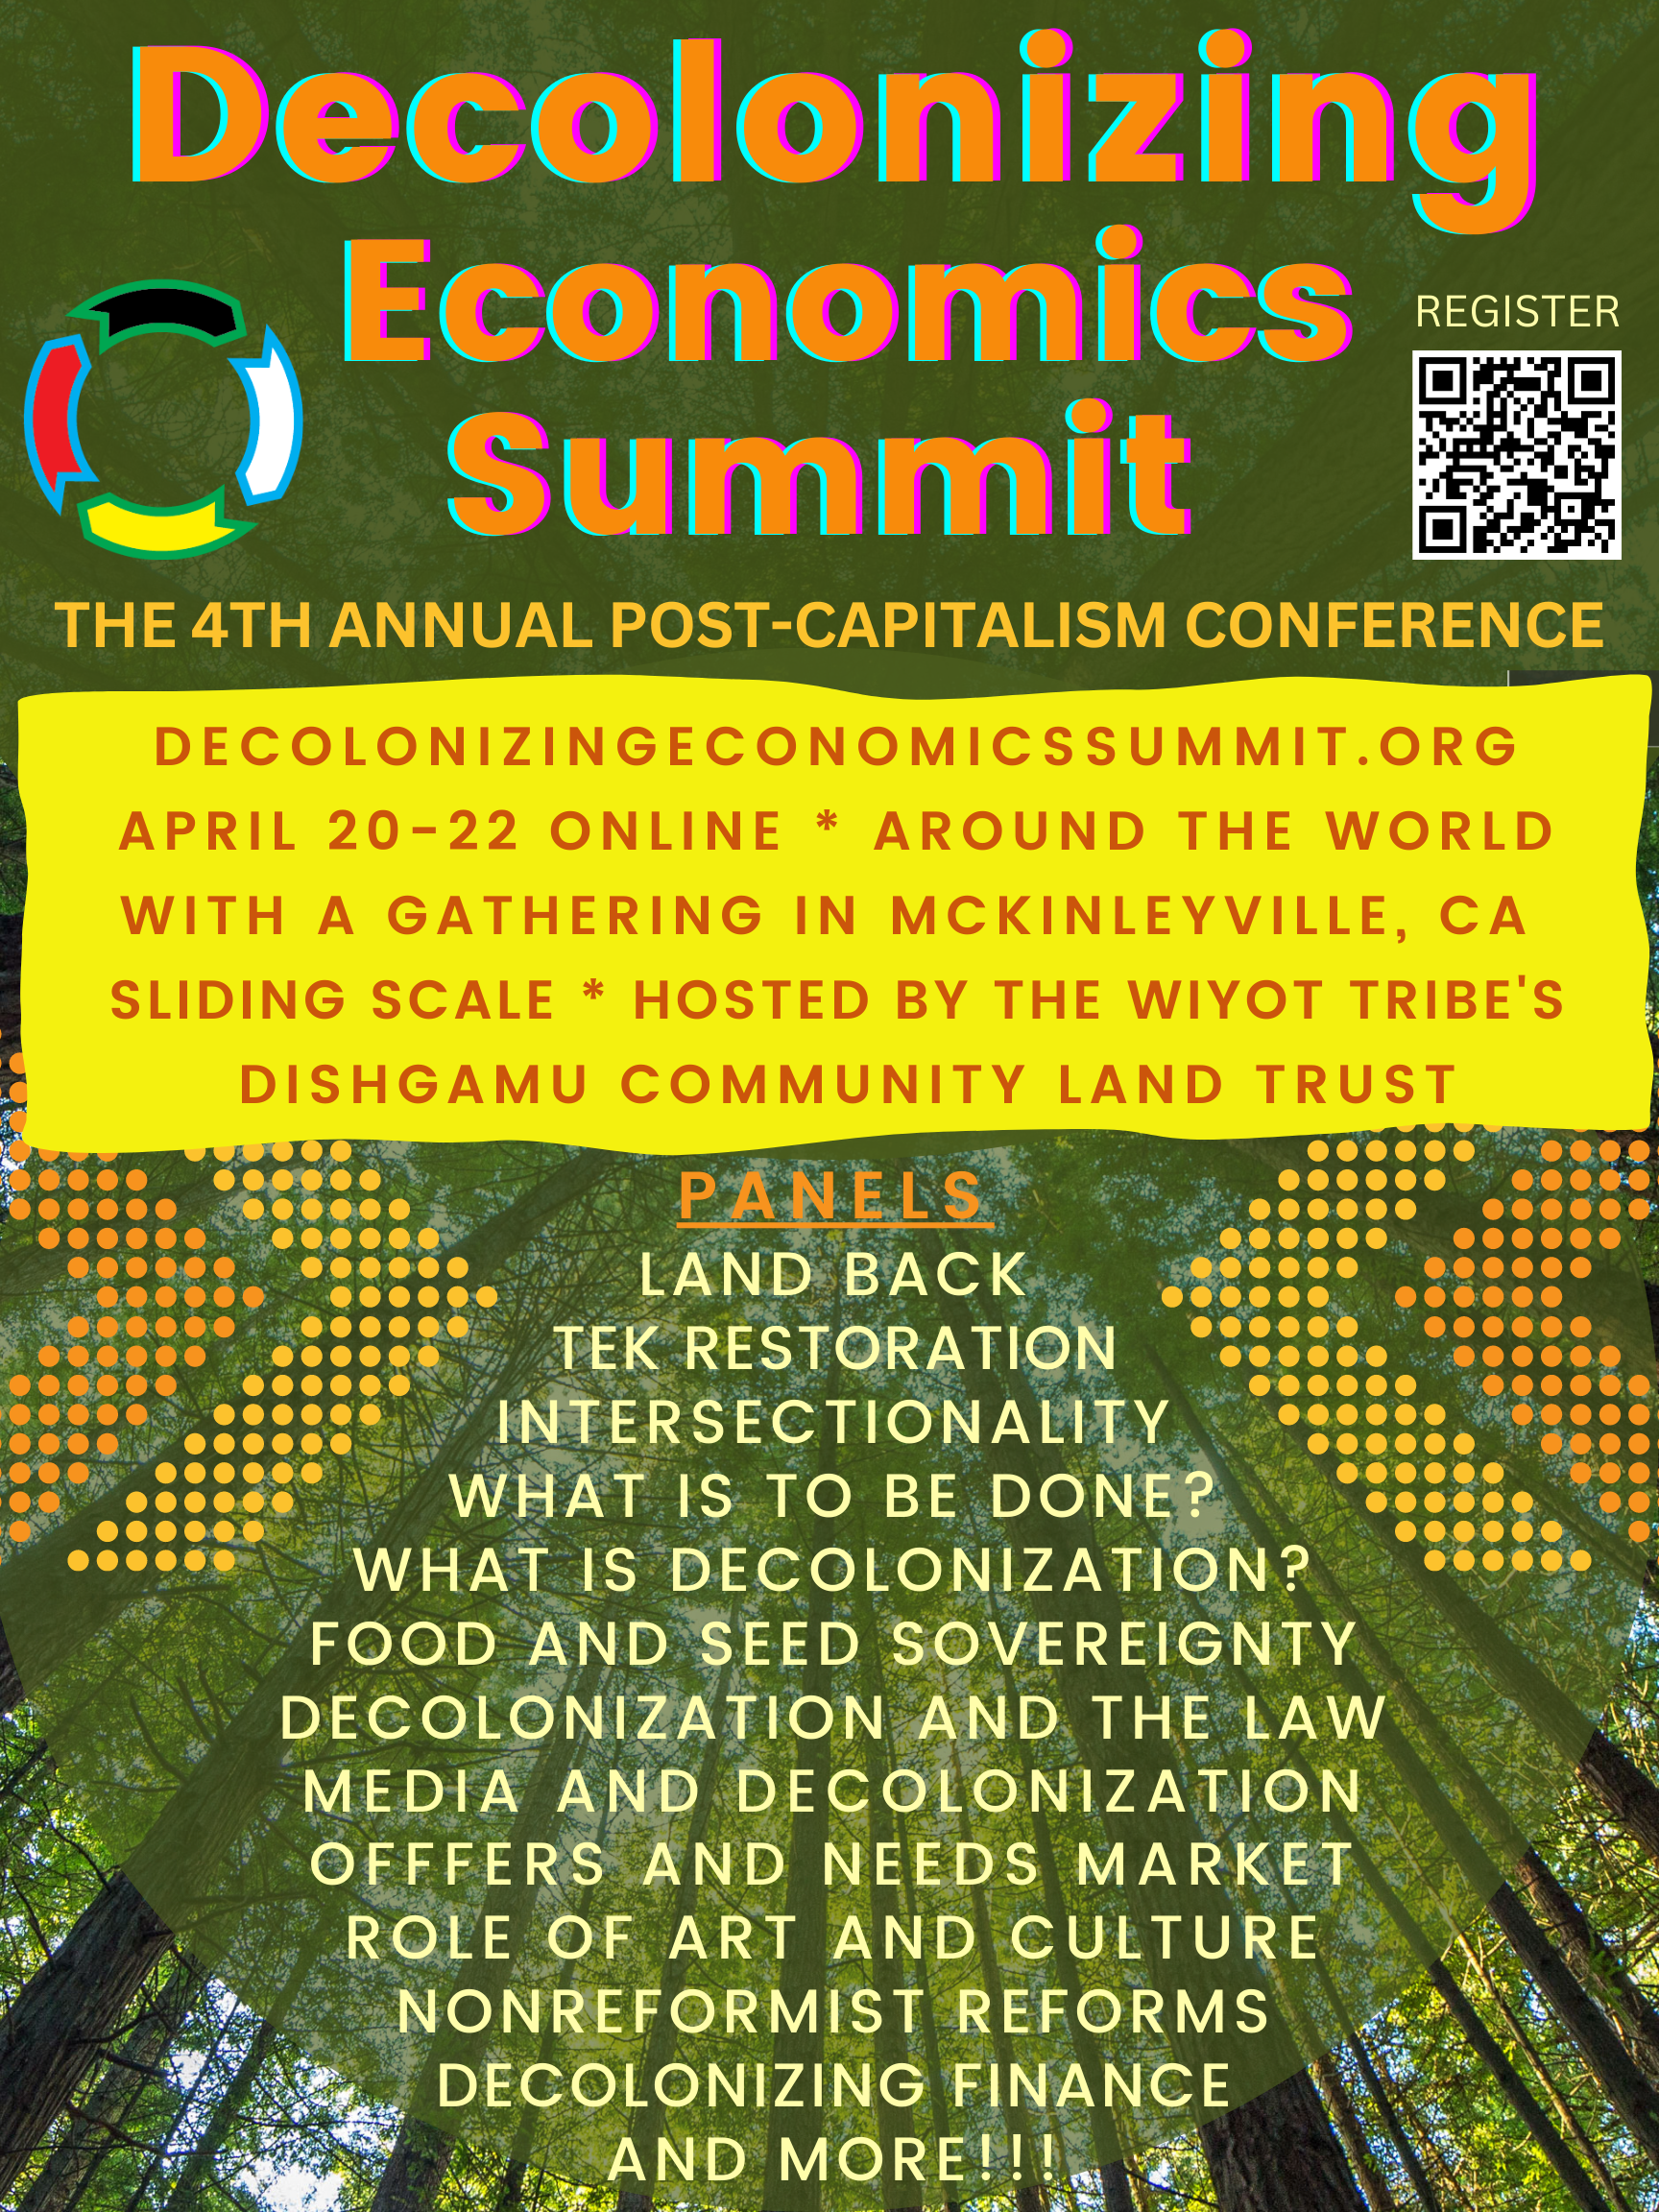 Flyer shows the Decolonizing Economics Flyer, which will serve as the 4th annual Post Capitalism Conference hosted 